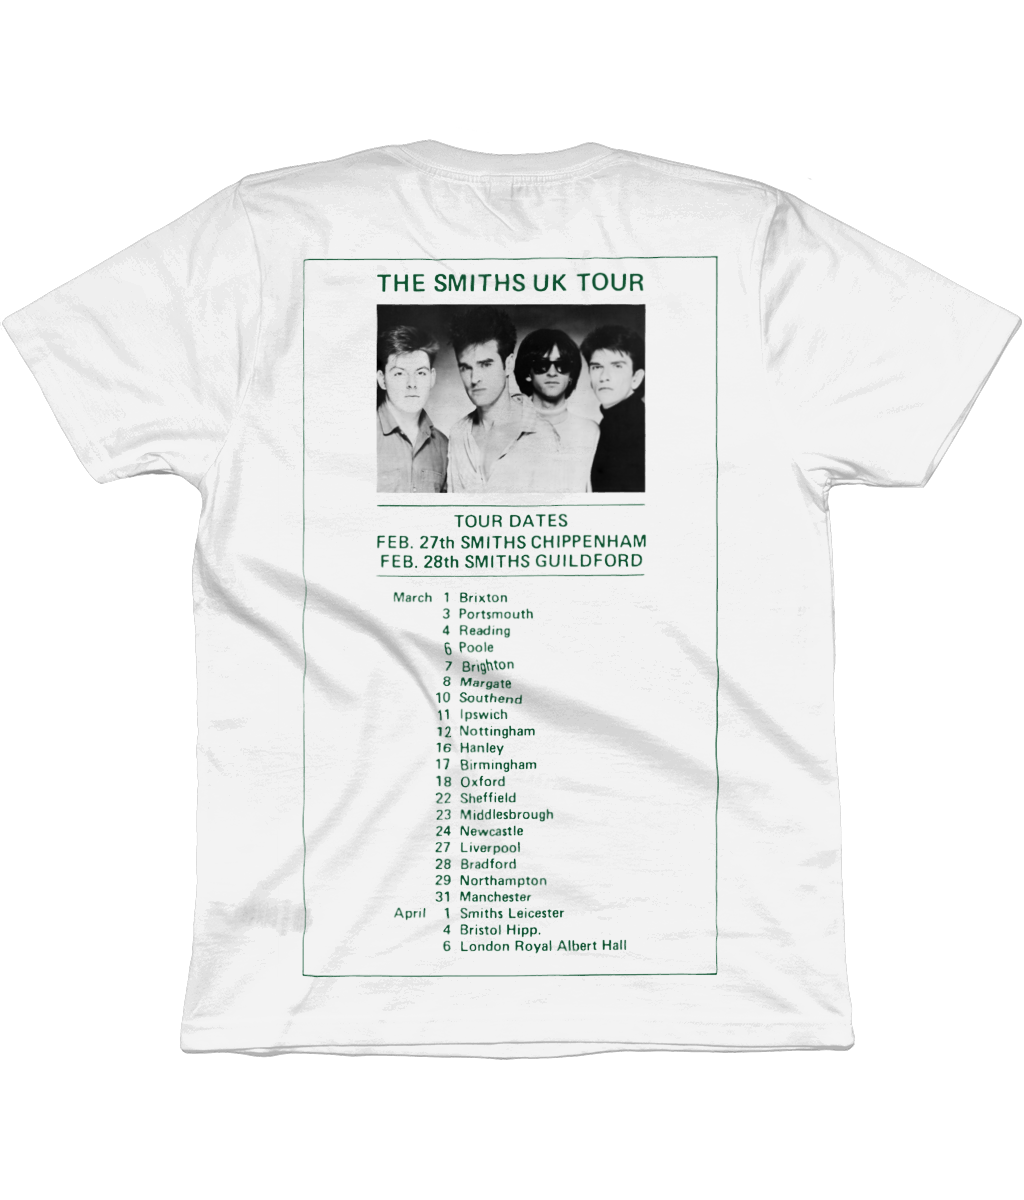 THE SMITHS - MEAT IS MURDER TOUR 1985 - Soldier - Green Text - Version 2